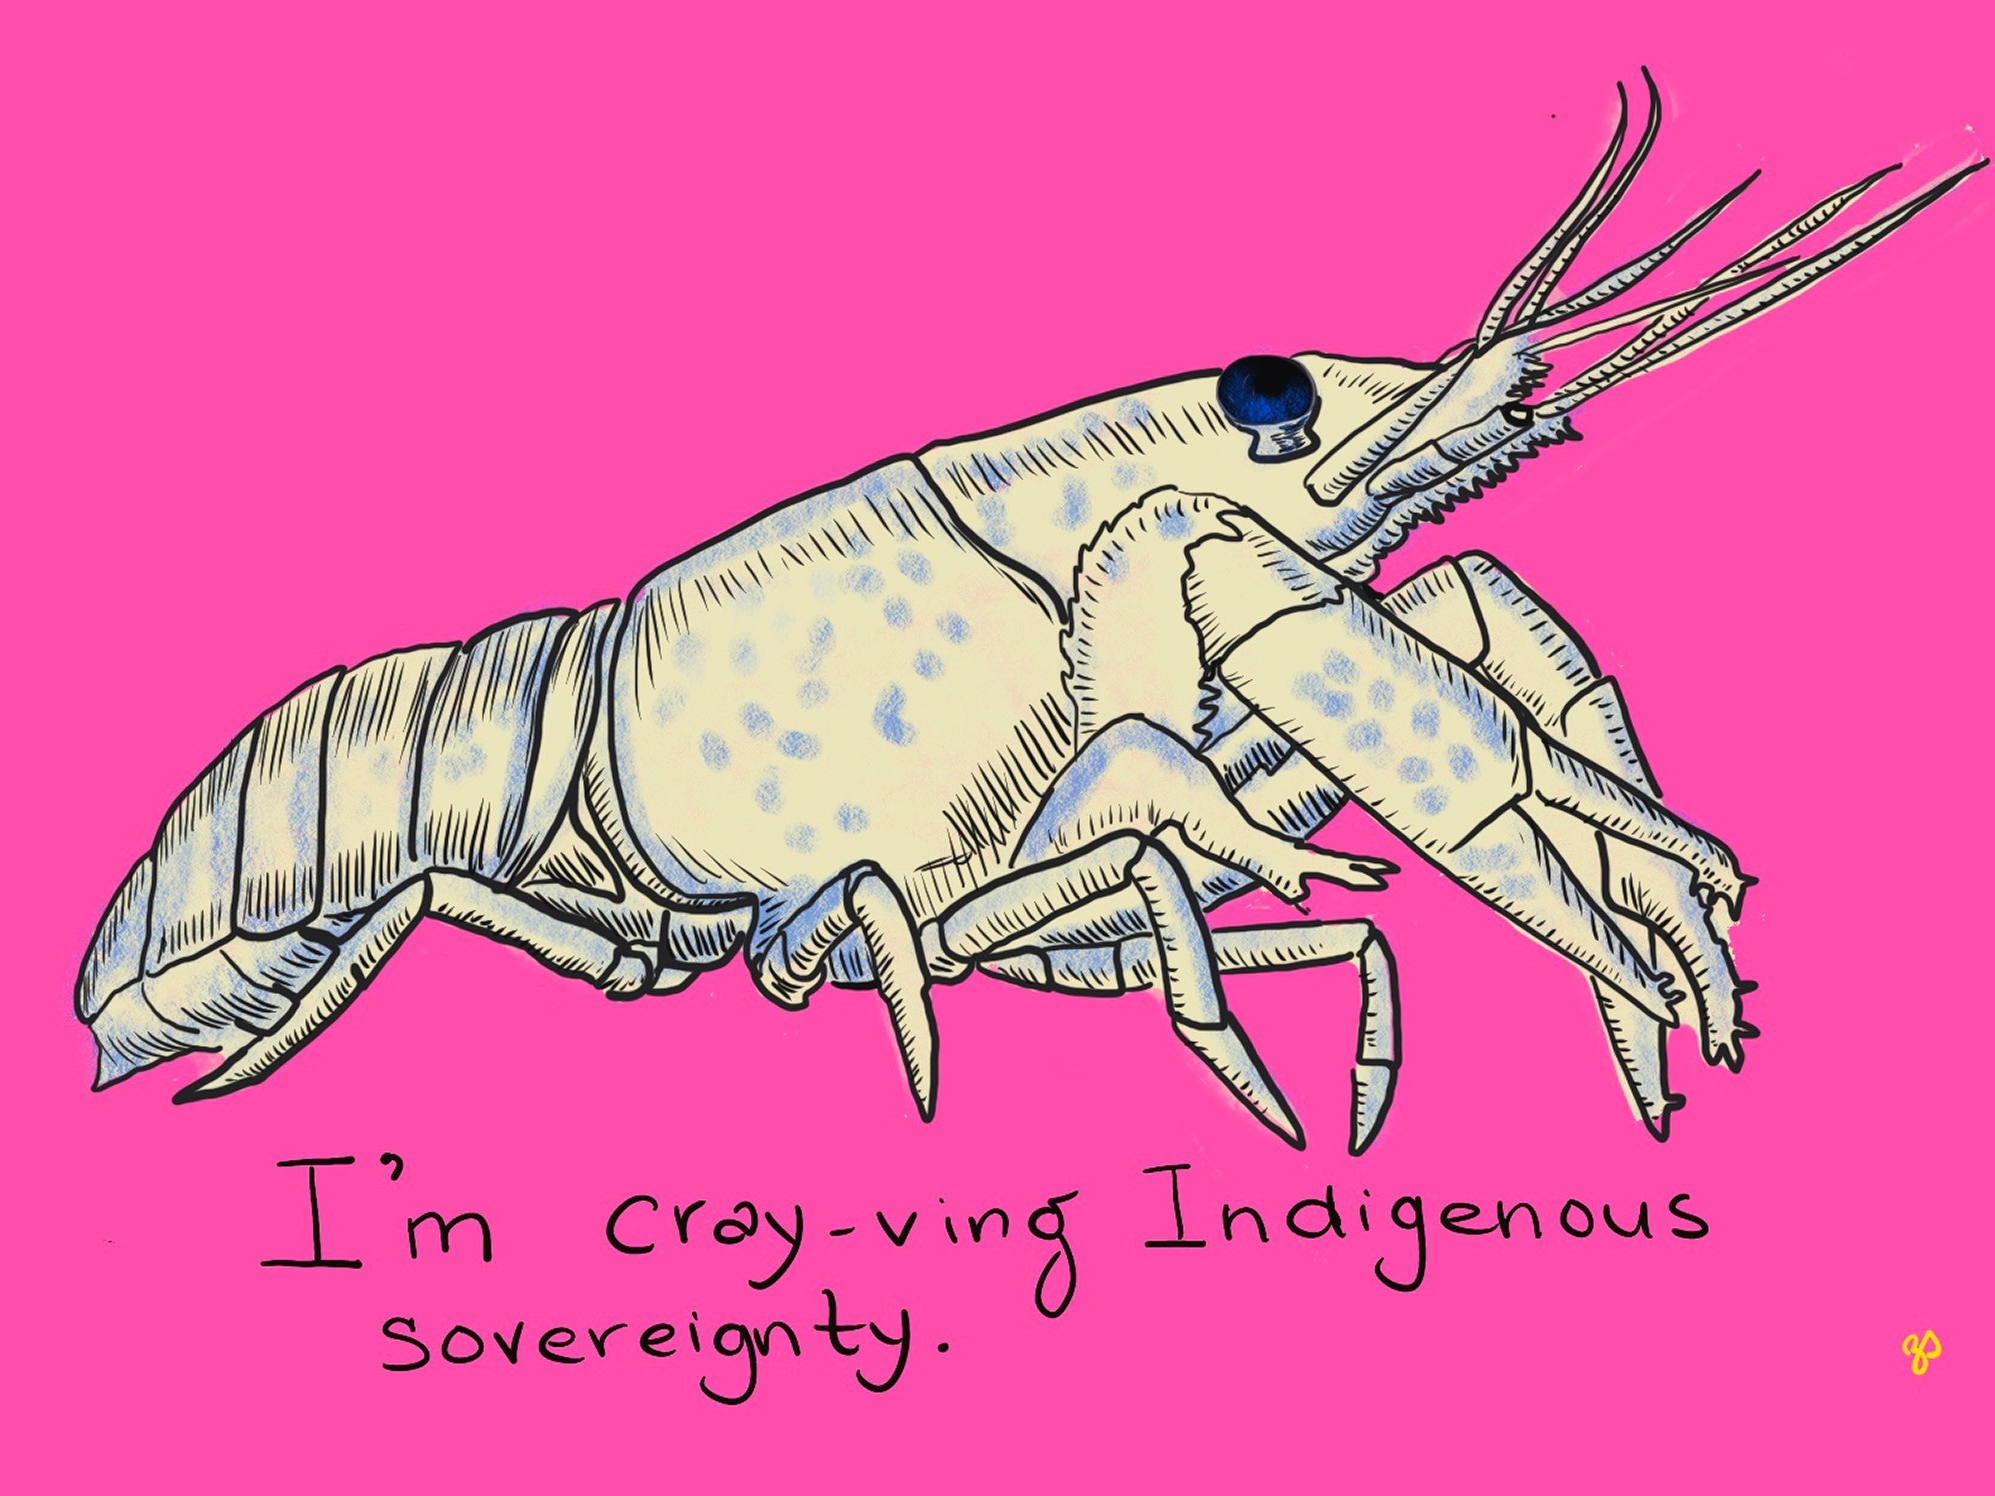 A drawing of a crayfish on a pink background, with the text "I'm cray-ving Indigenous sovereignty"